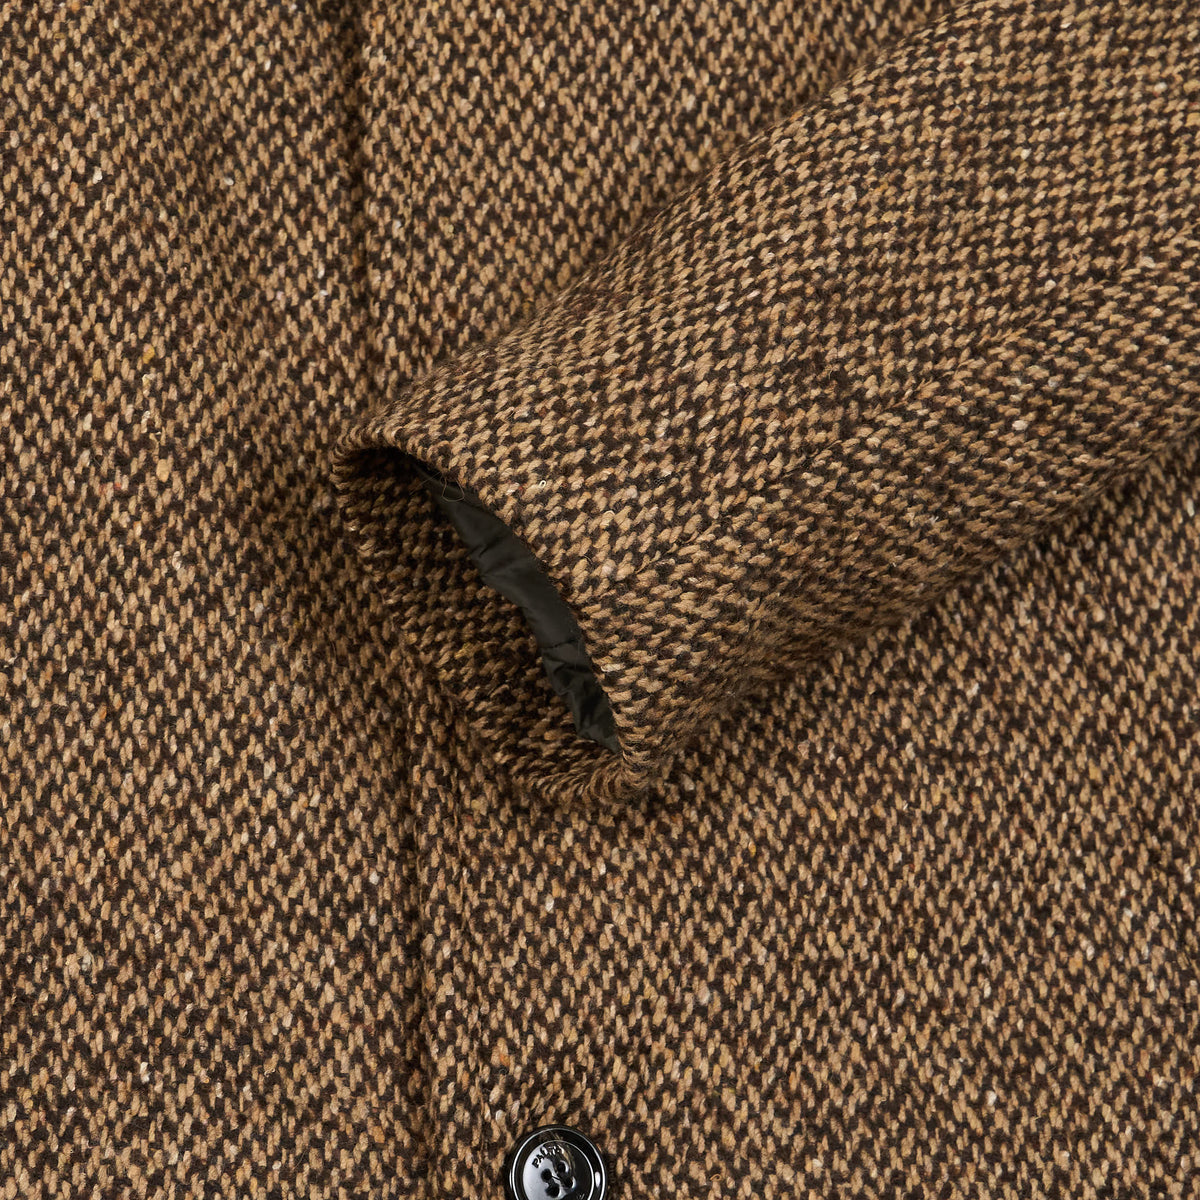 Palto Wool Blend Tweed Coat Thermore® Insulation